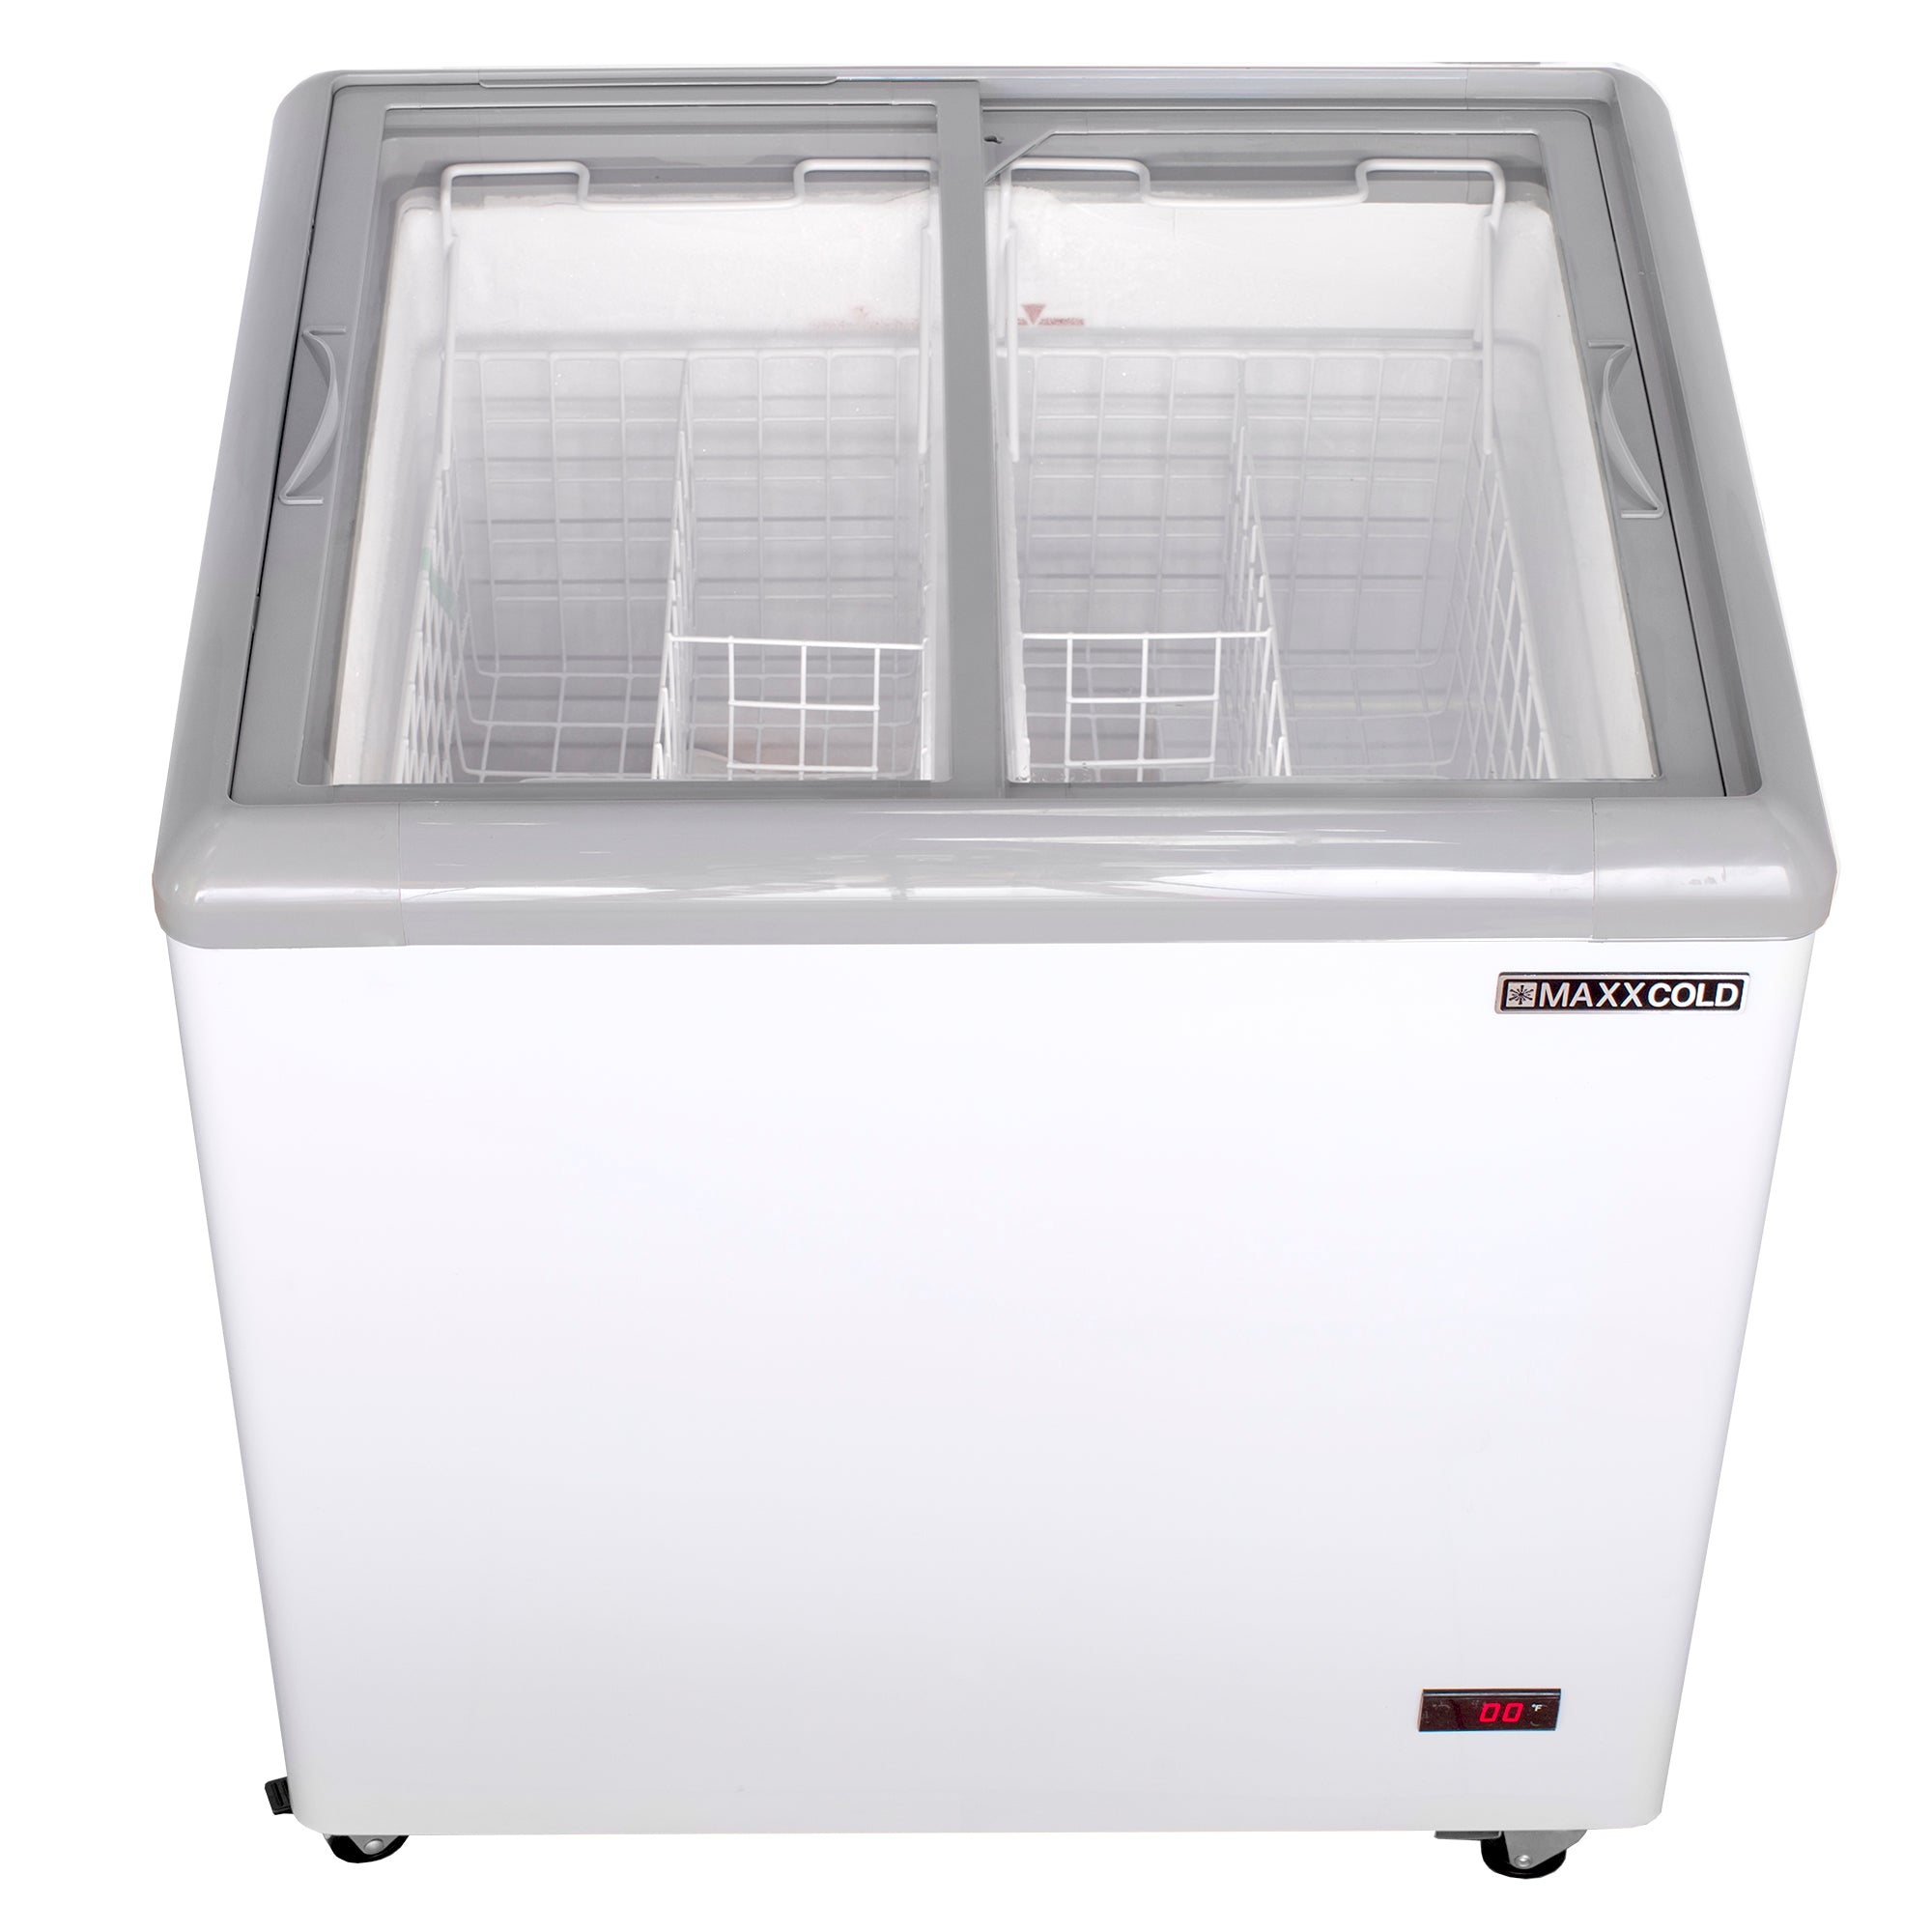 Maxx Cold - MXF31F, Maxx Cold Sliding Glass Top Mobile Ice Cream Display Freezer, 31"W, 5.8 cu. ft. Storage Capacity,  Equipped with (2) Wire Baskets, in White